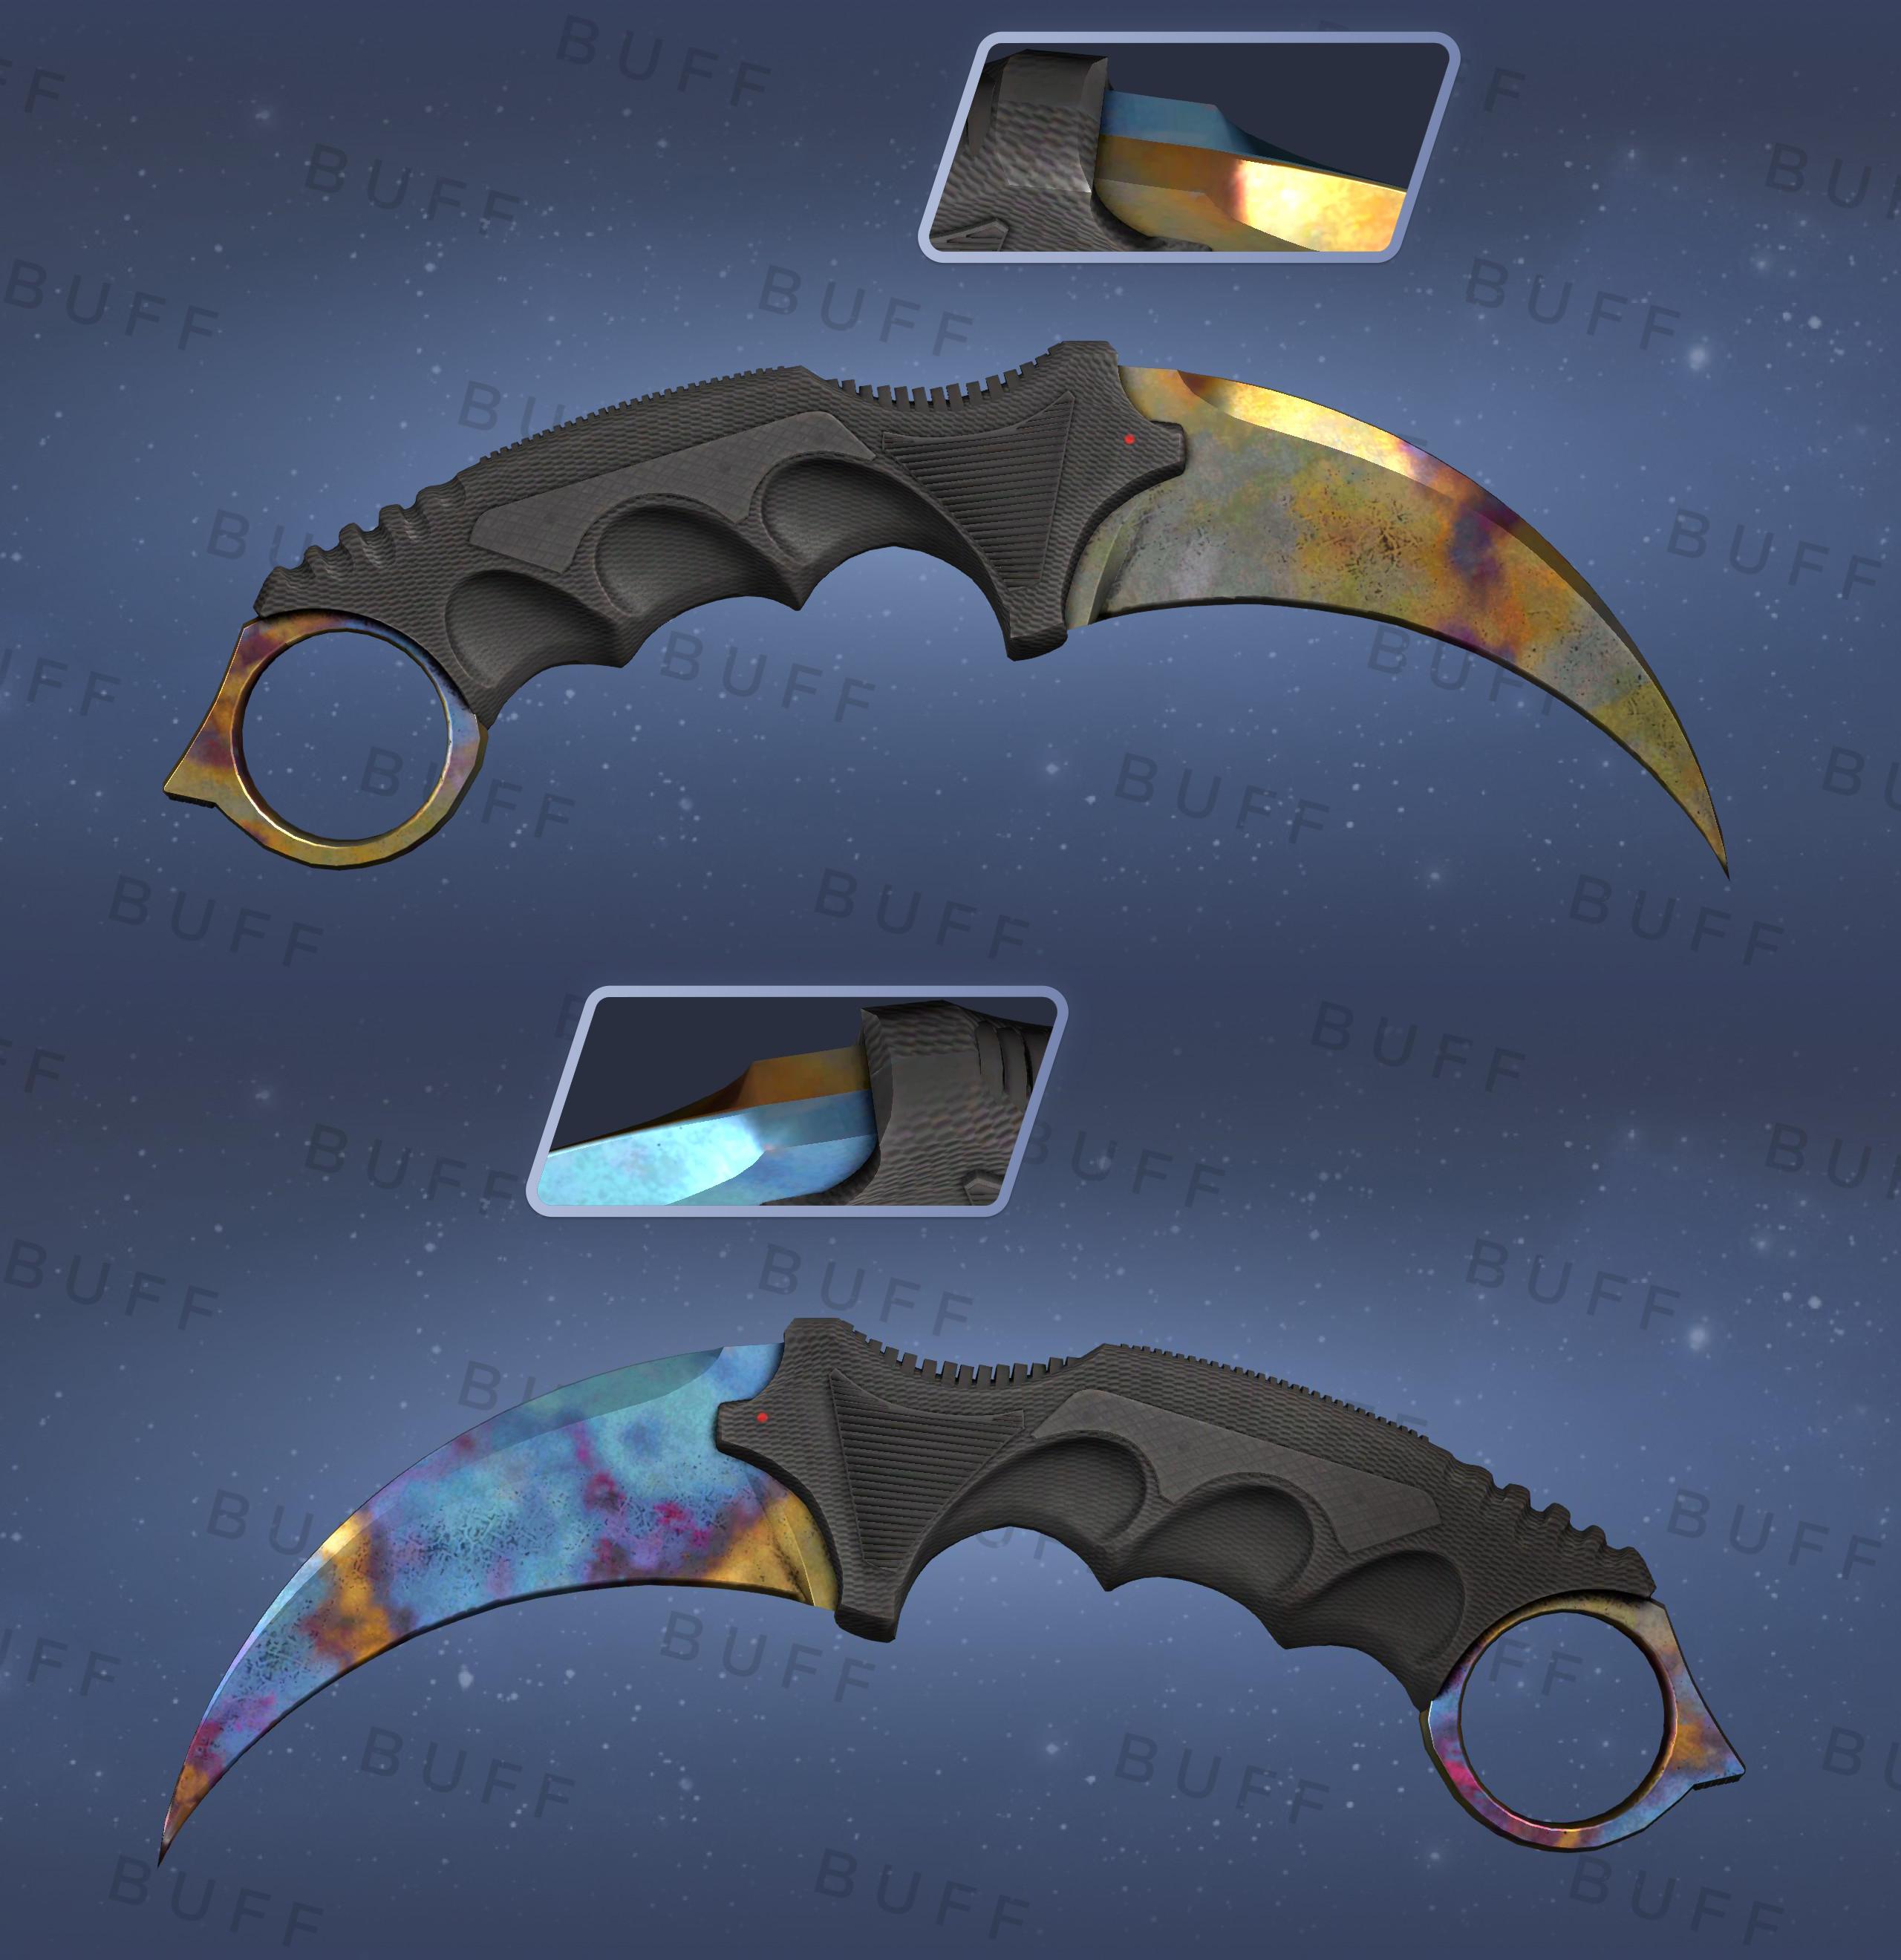 ranked-karambit-case-hardened-pattern-and-price-page-2-broskins